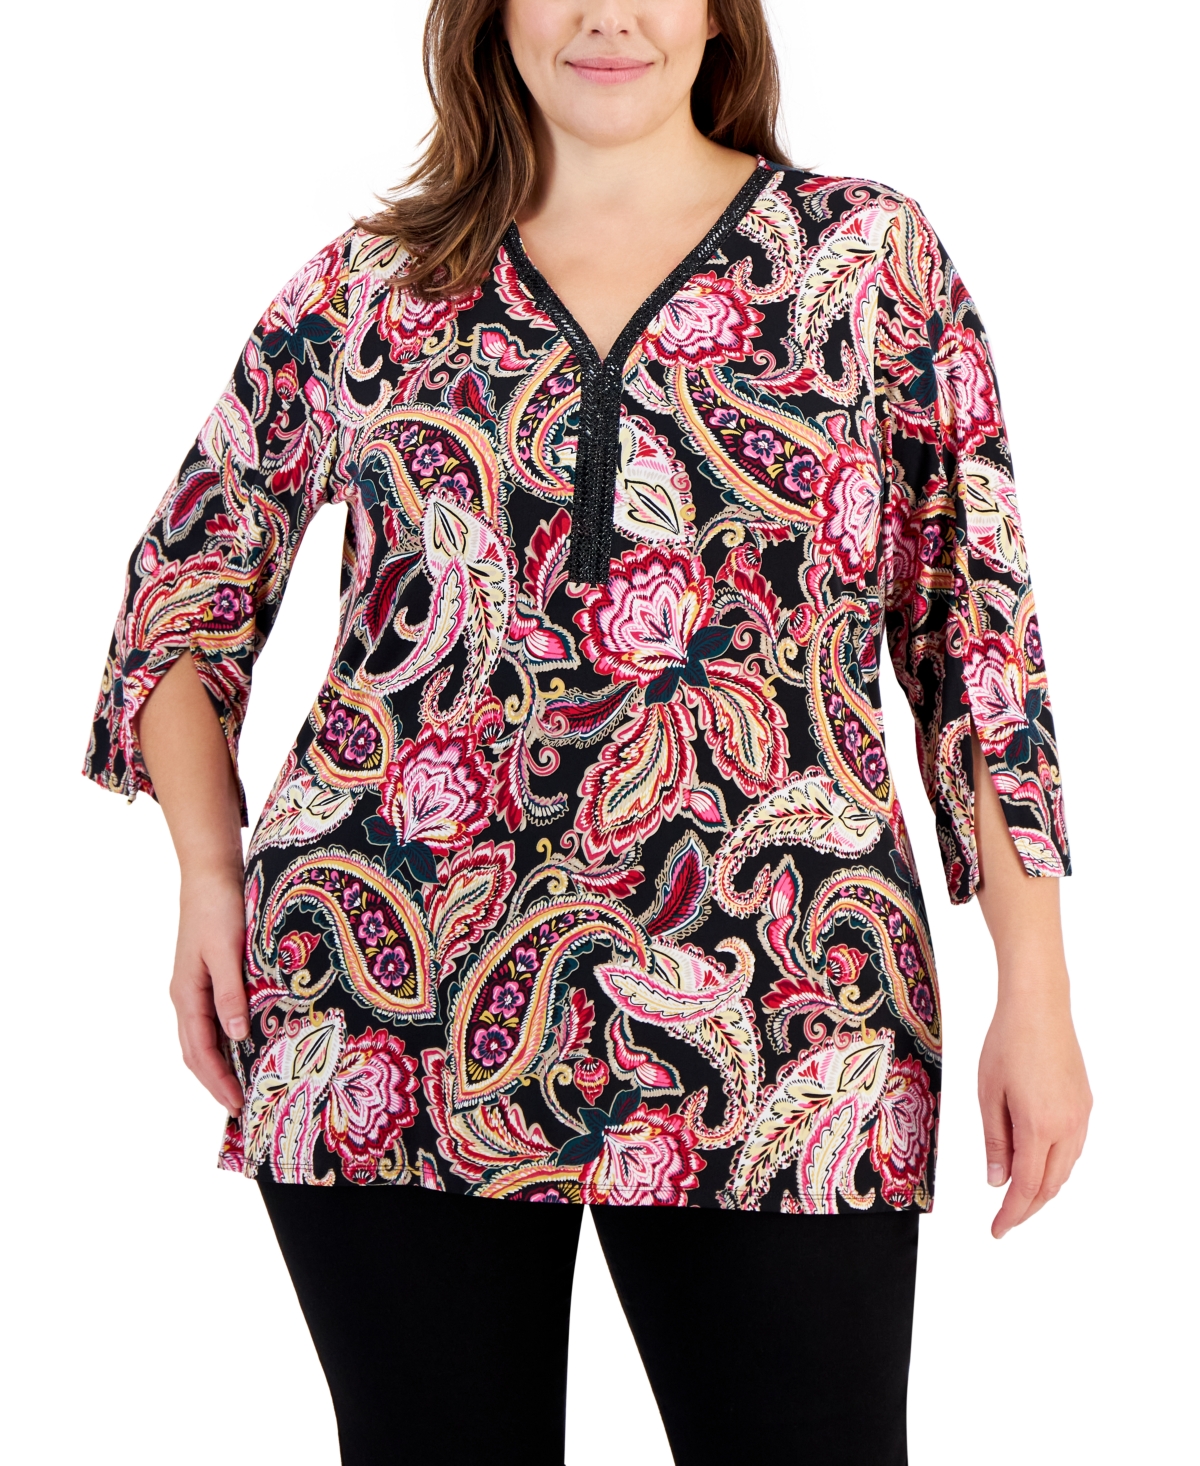 Jm Collection Plus Size Paola Paisley Printed Top, Created for Macy's